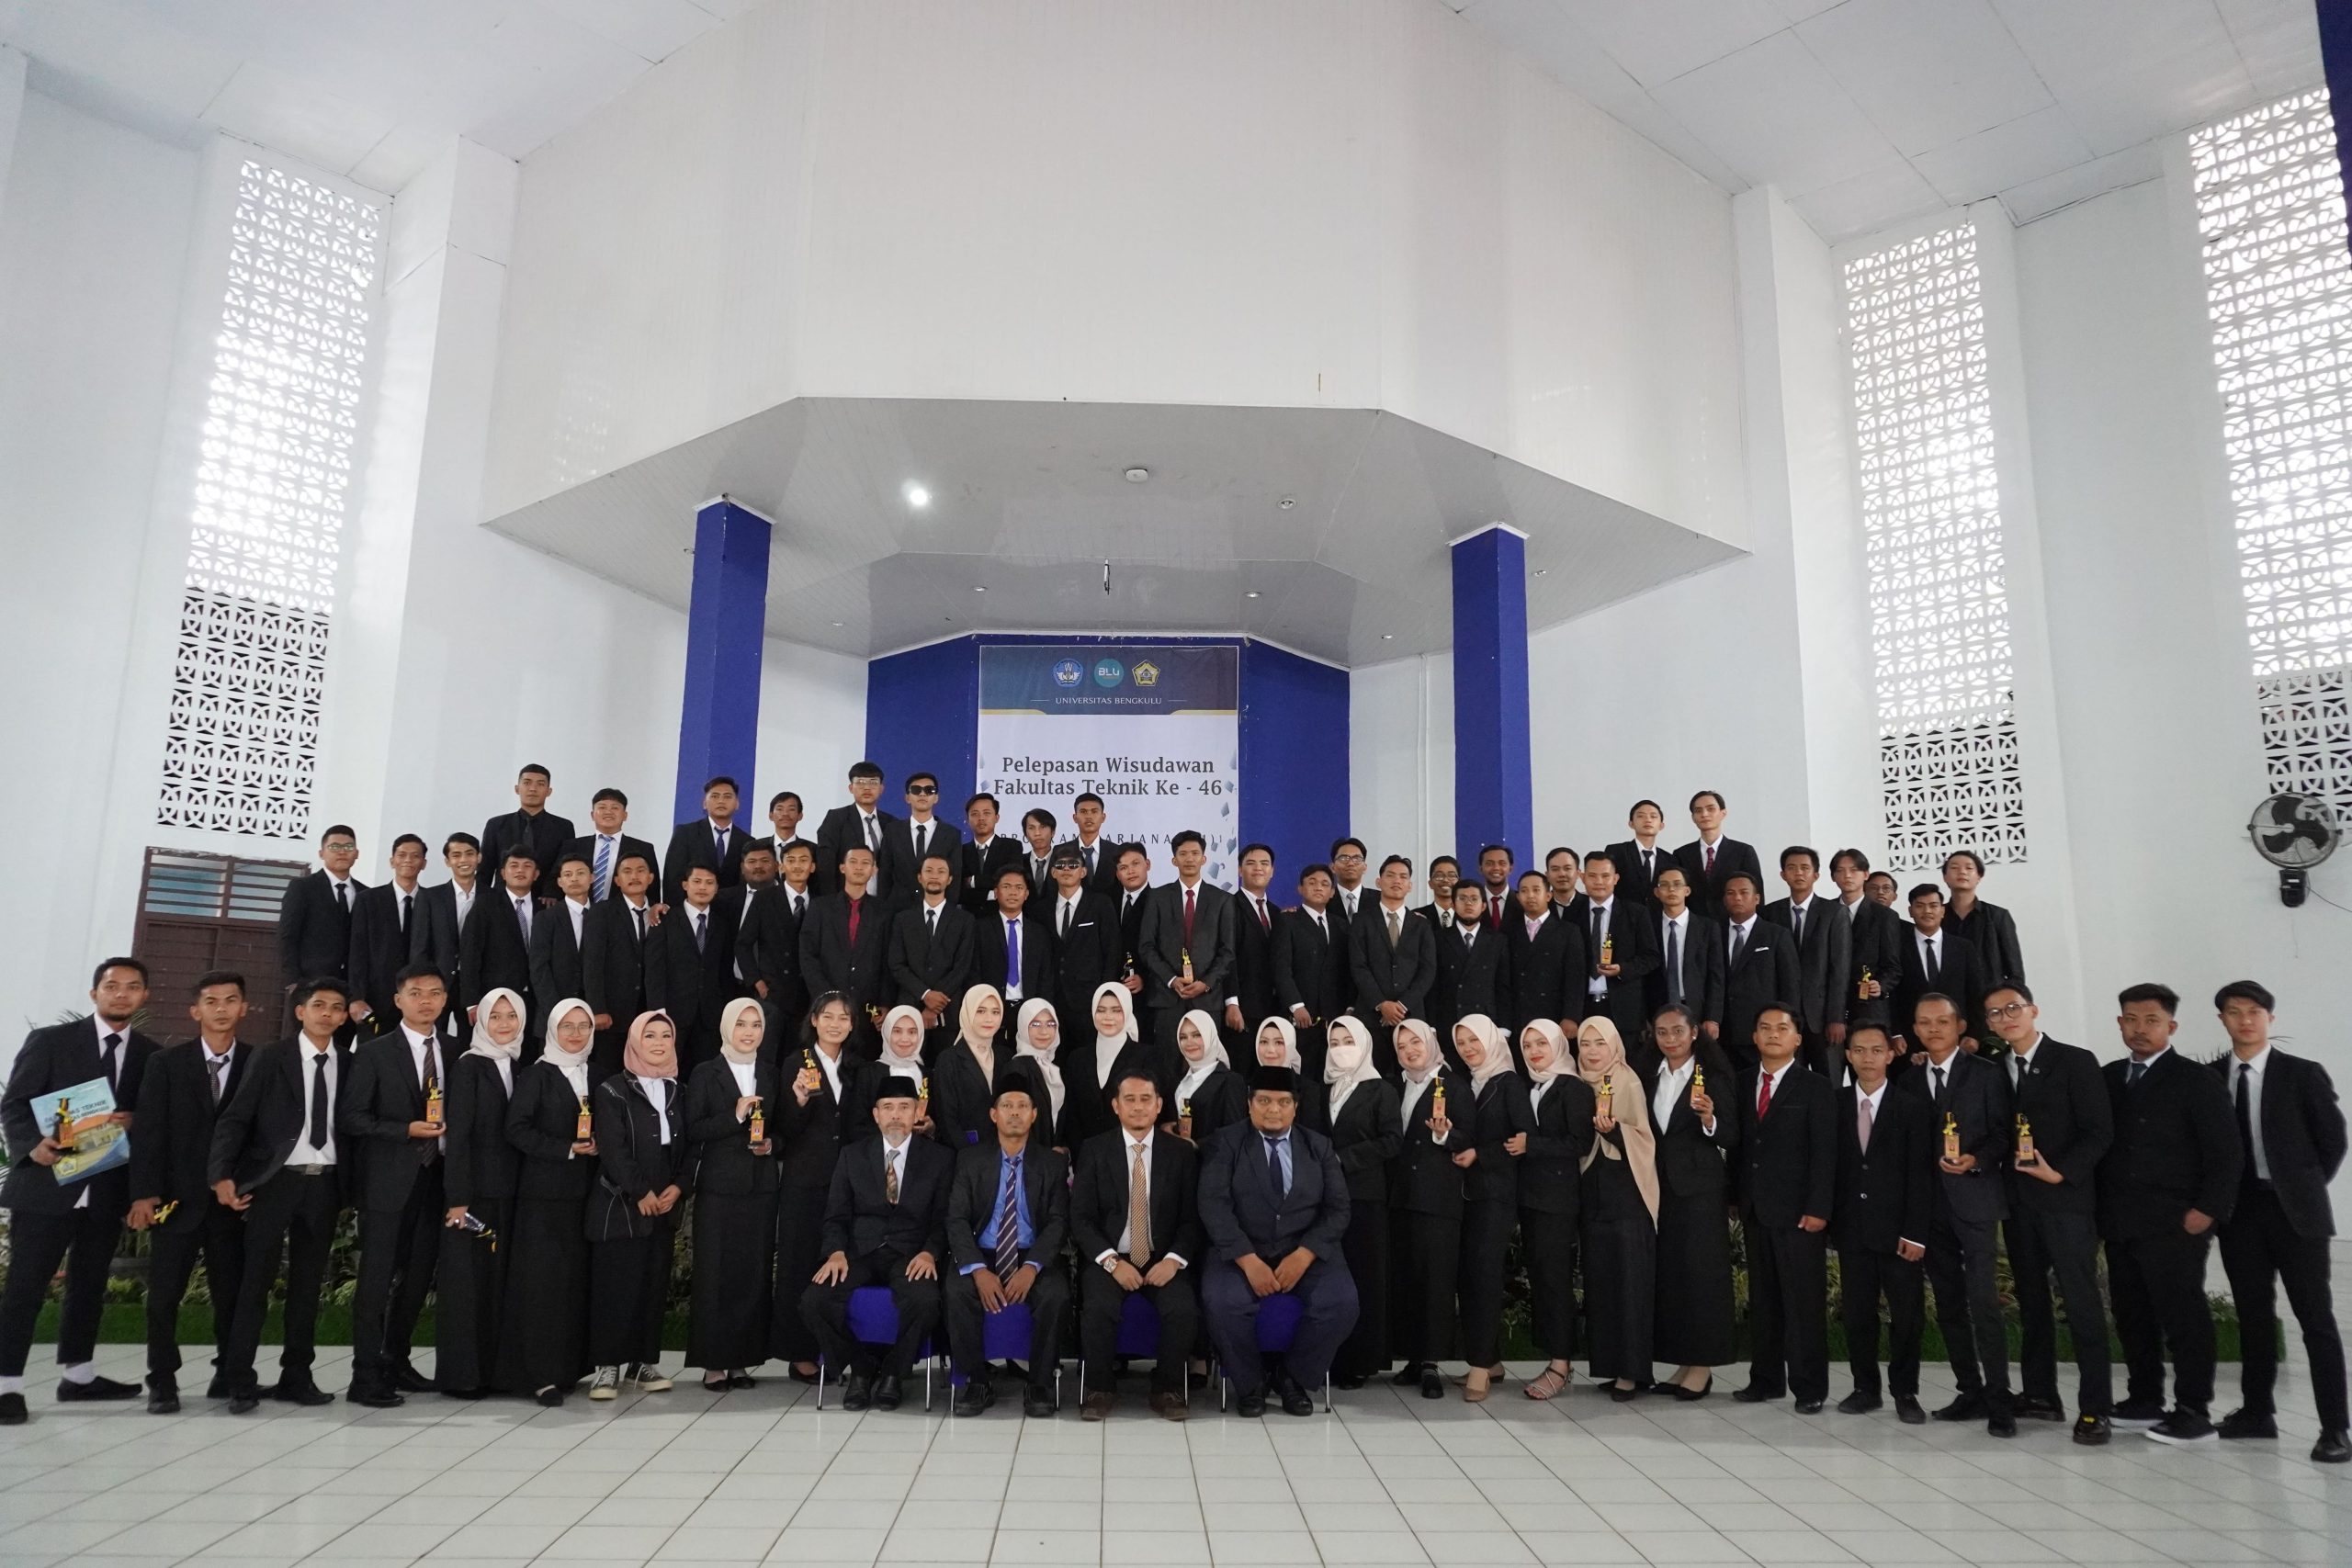 Judiciary of the 46th Faculty of Engineering, Bengkulu University￼